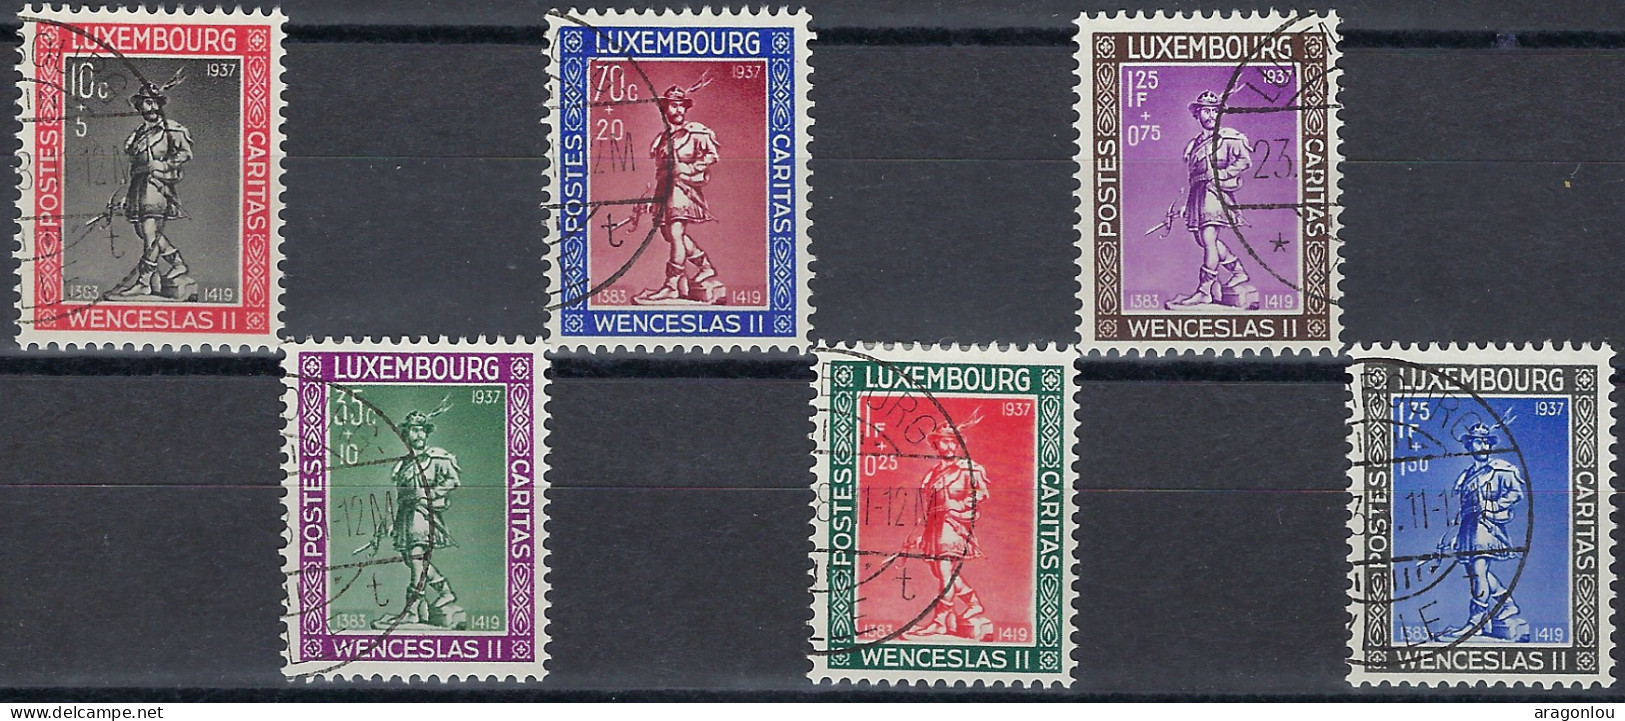 Luxembourg - Luxemburrg - Timbres  1937   Wenzels II      Série   ° - Usados